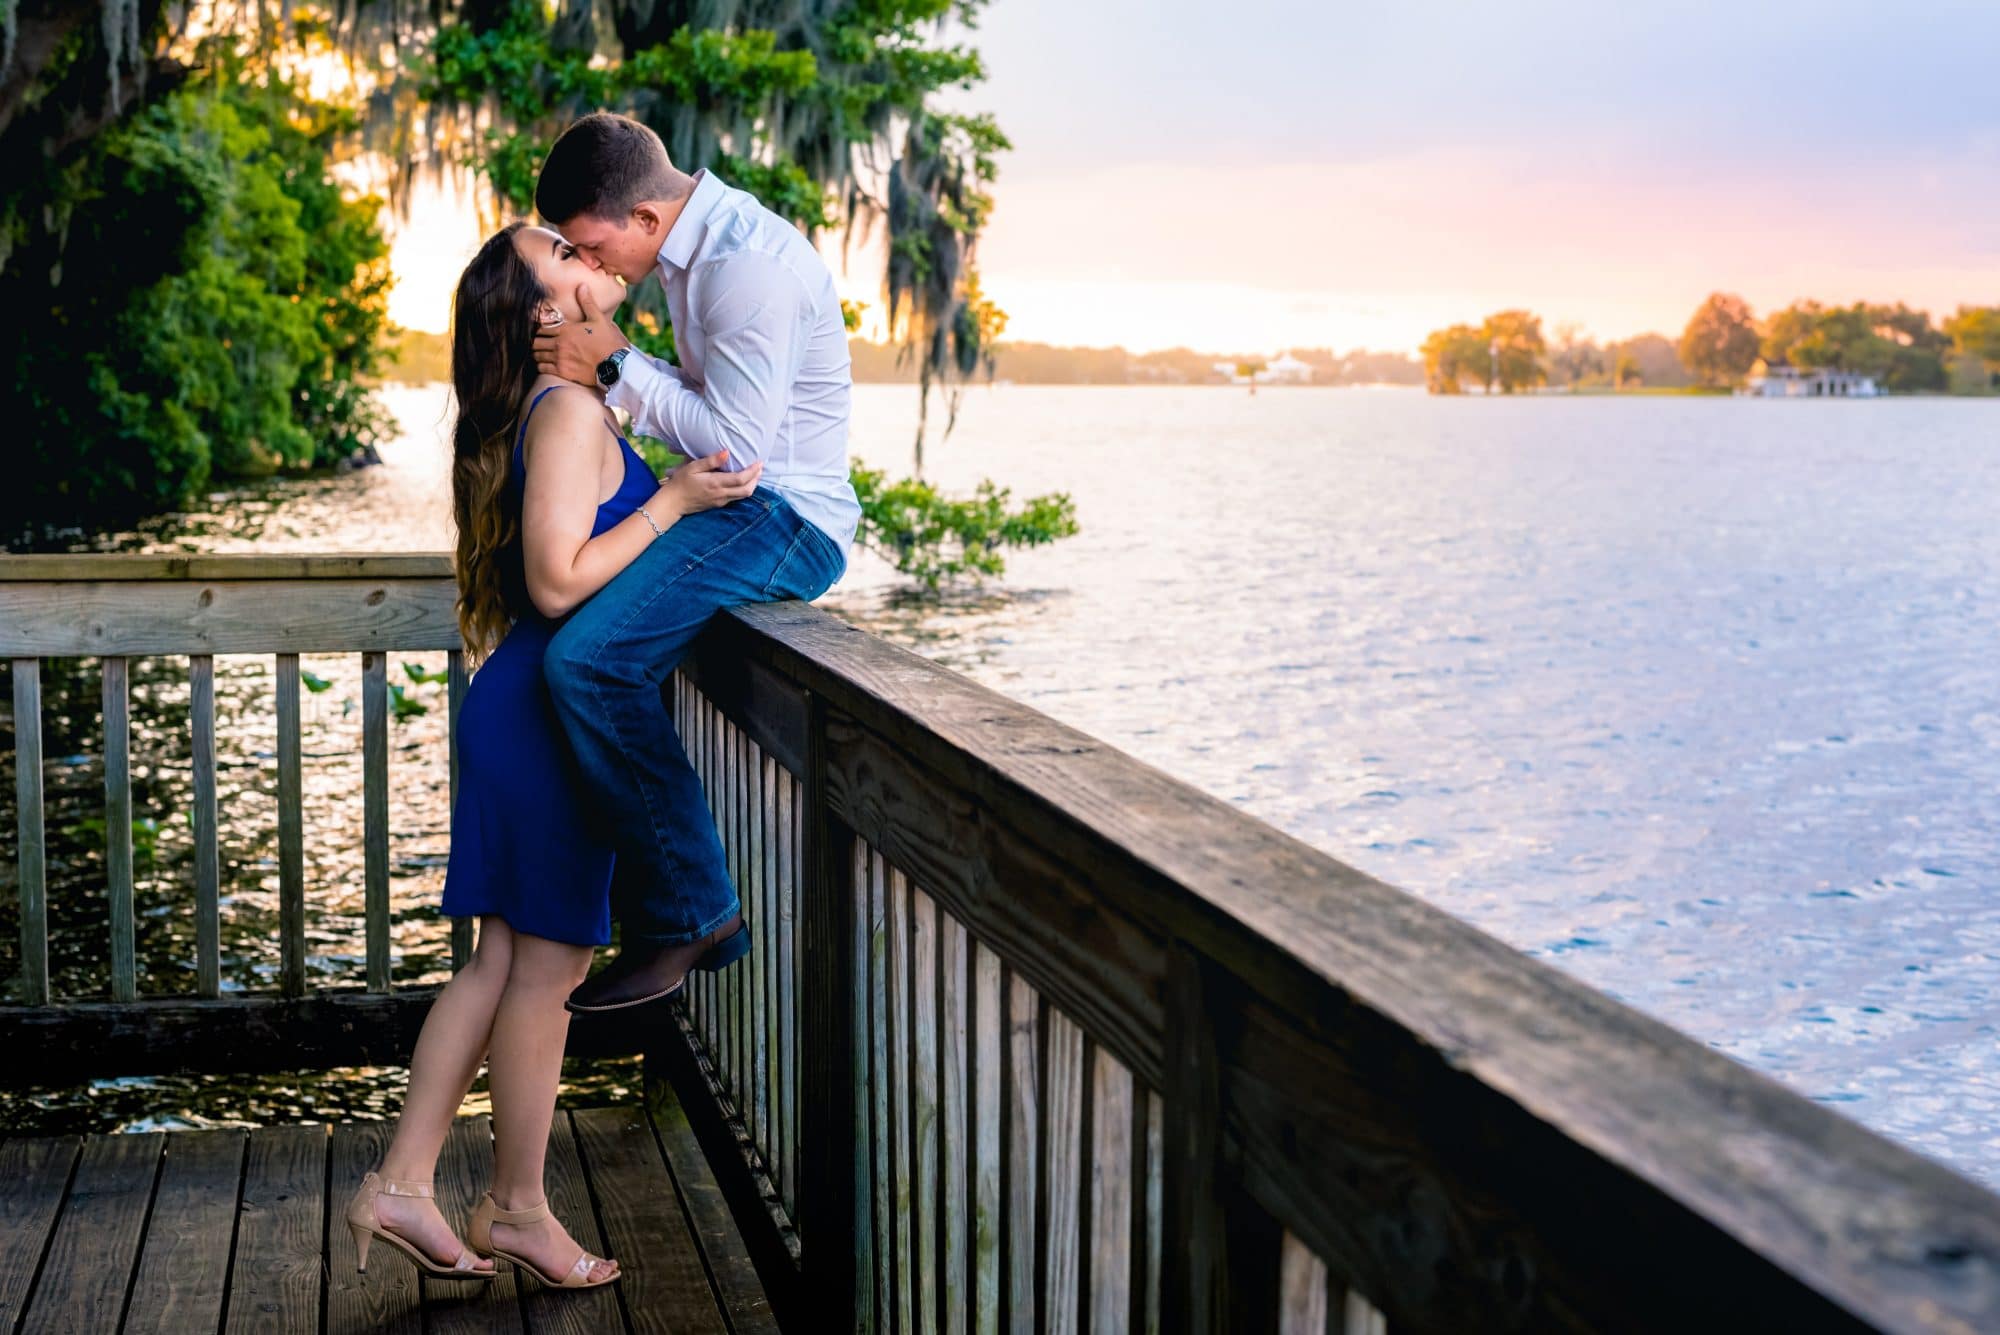 Embrace-by-Kara-Couple kissing on a dock at sunset